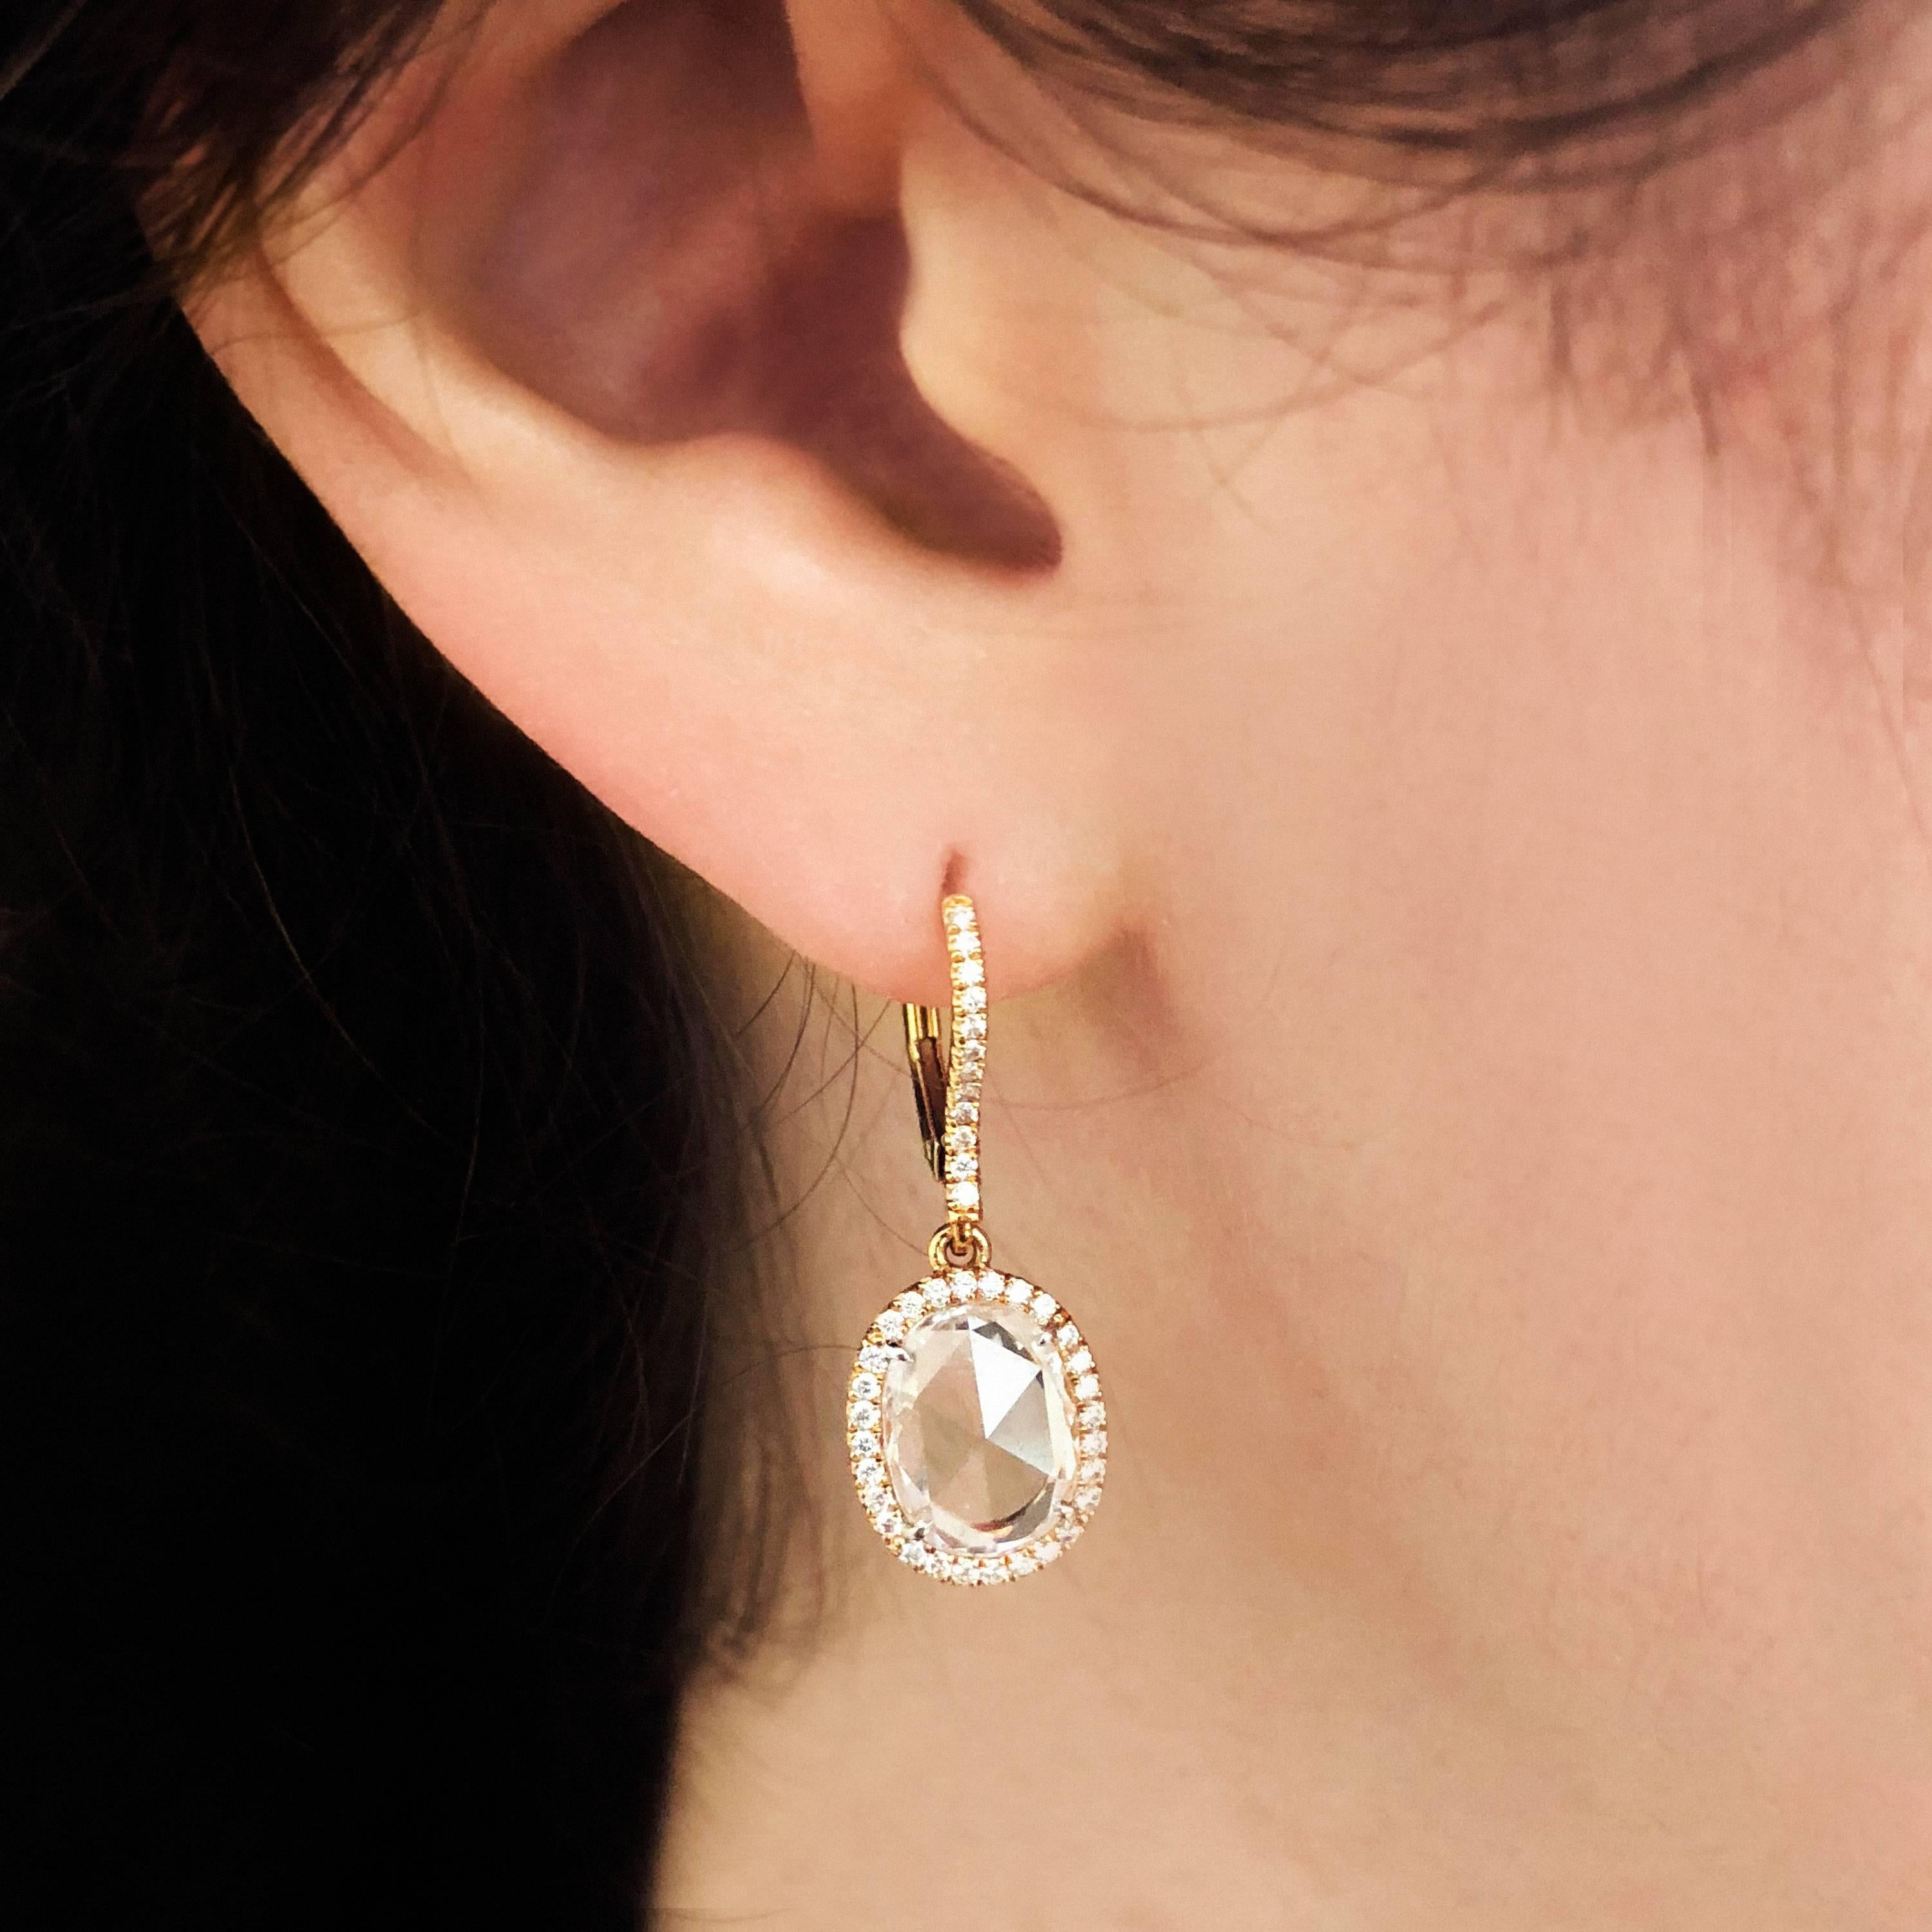 2.57 tw Rose Cut diamonds (2 stones) F VS. Very sparkly and a perfectly matched pair
Round diamond melee 0.32 tw (80 stones)
18k rose gold
halo earrings / dangle earrings / drop earrings / leverback earrings